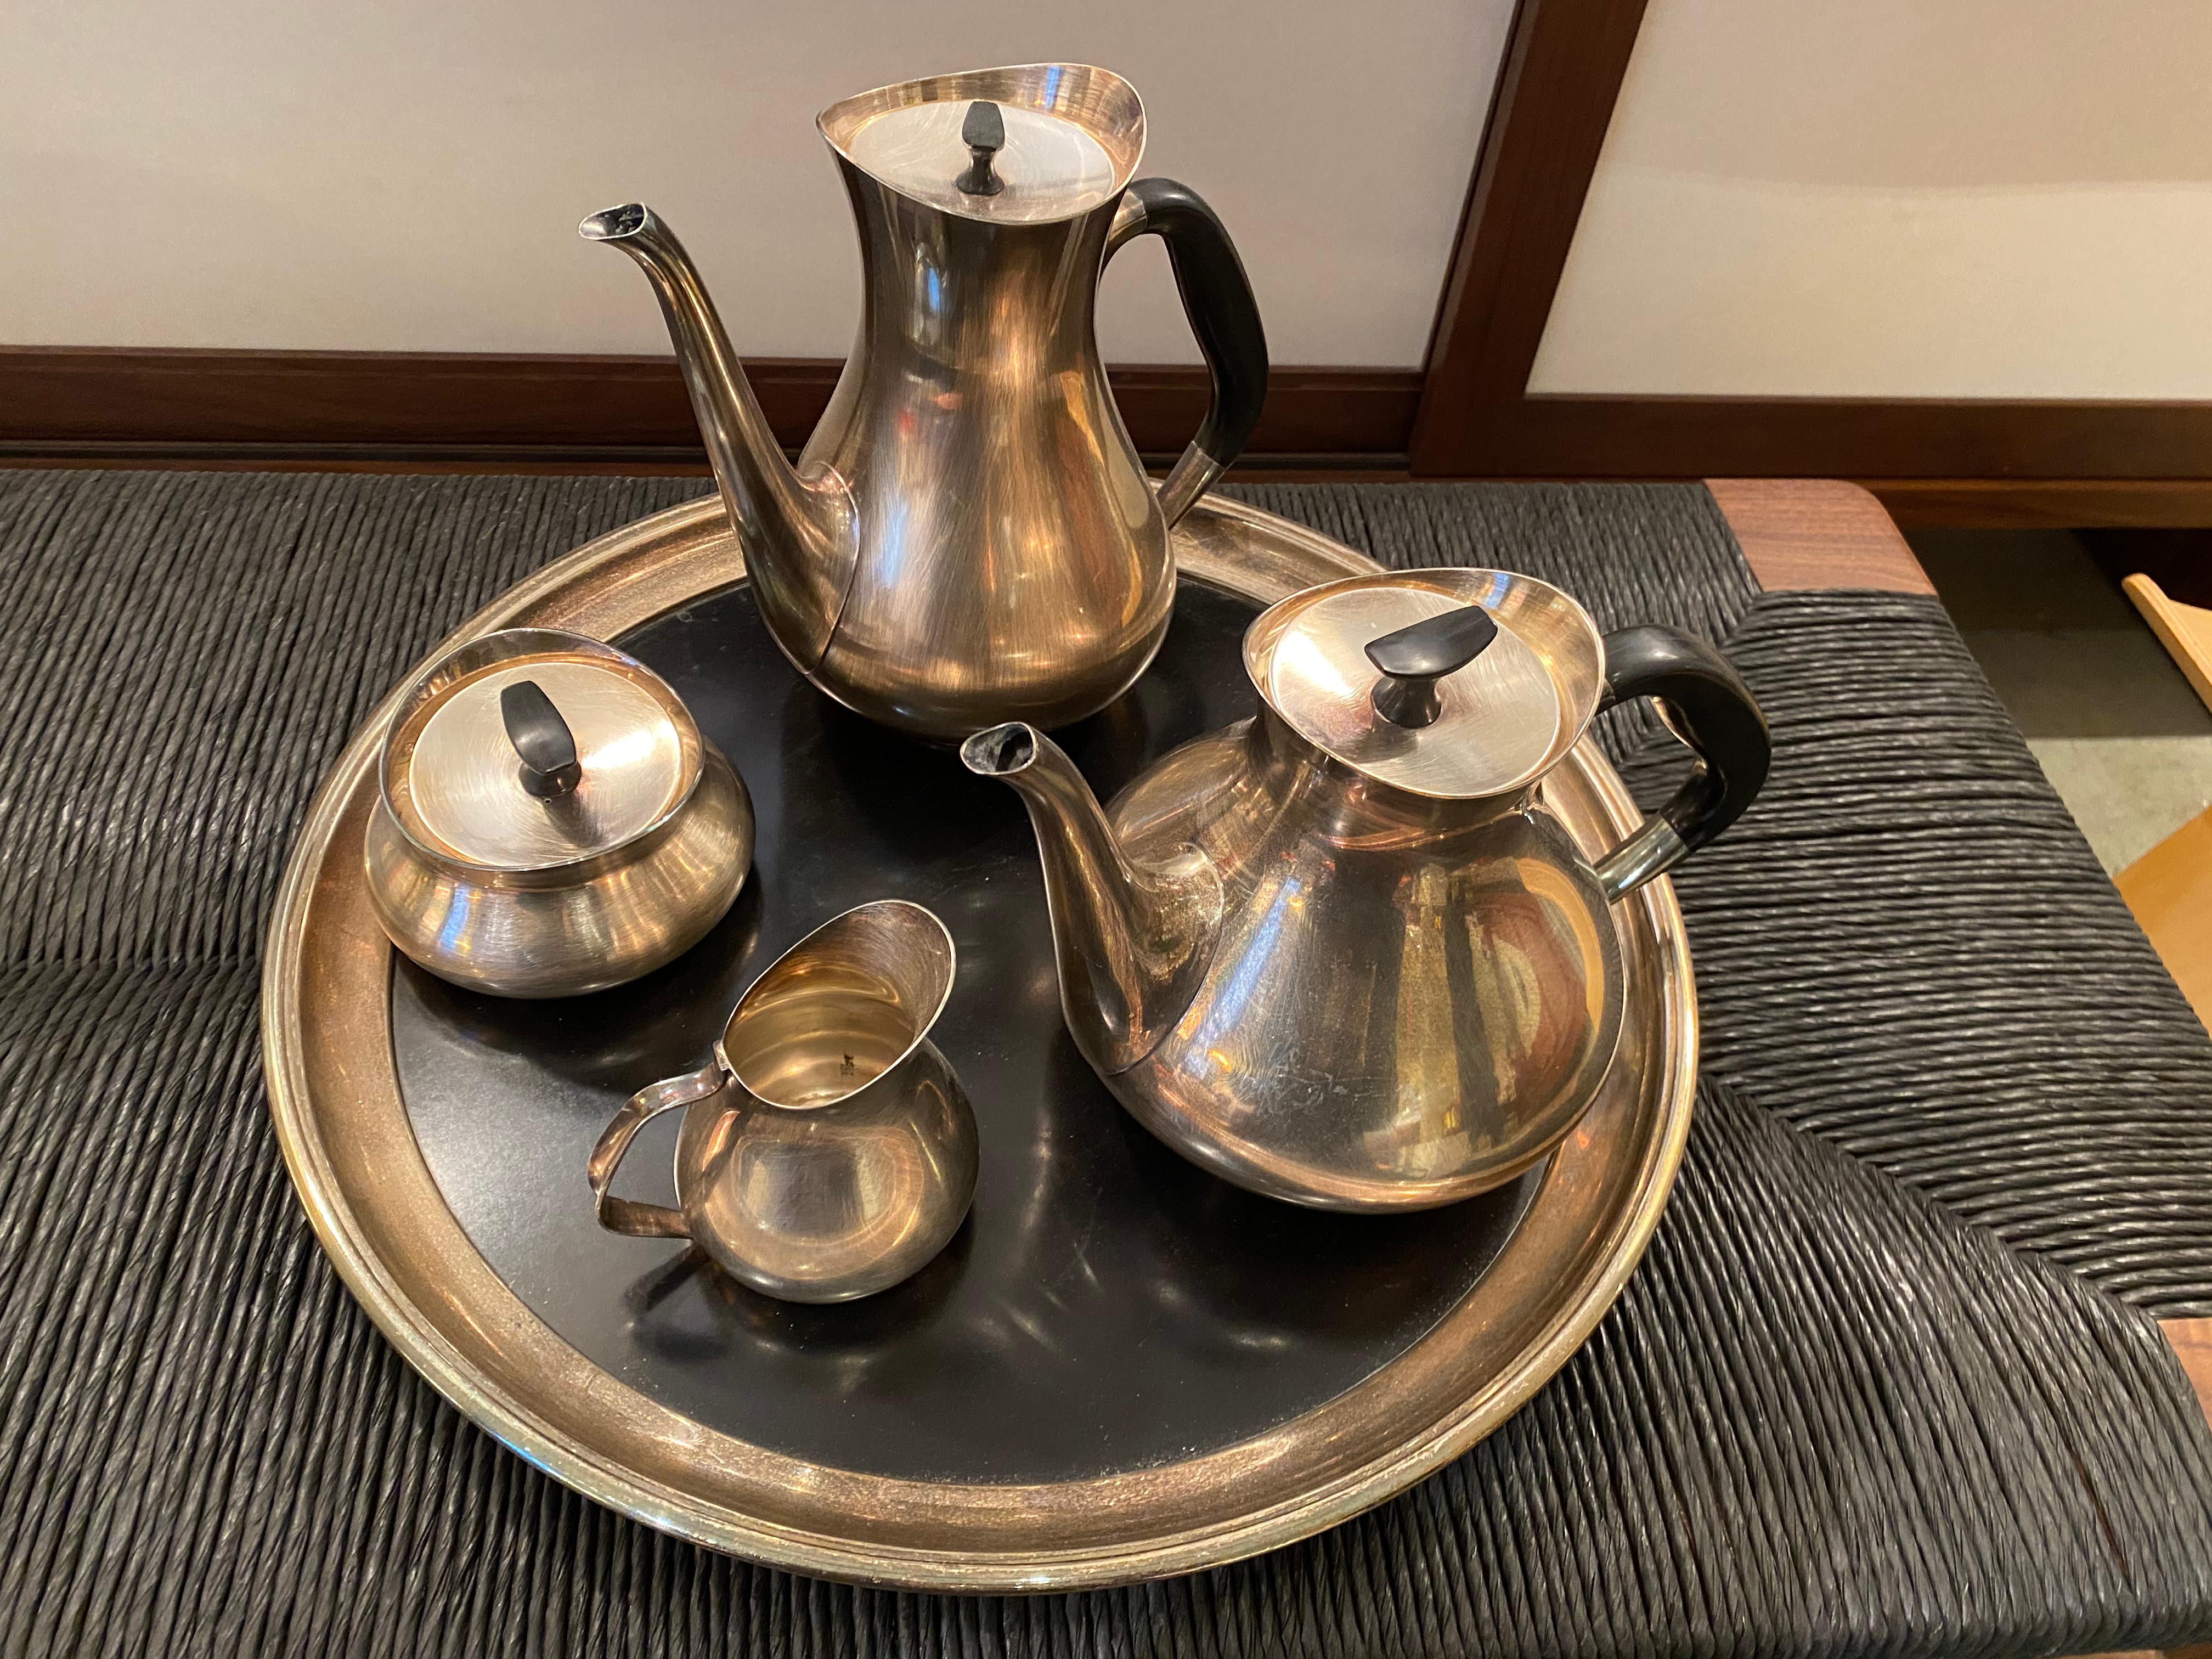 Mid-Century Modern silver plated 4-piece tea and coffee set including elegant round tray, designed by Hans Bunde for Cohr, circa 1960s, Denmark. The lids have a special fitting so they never fall when pouring.